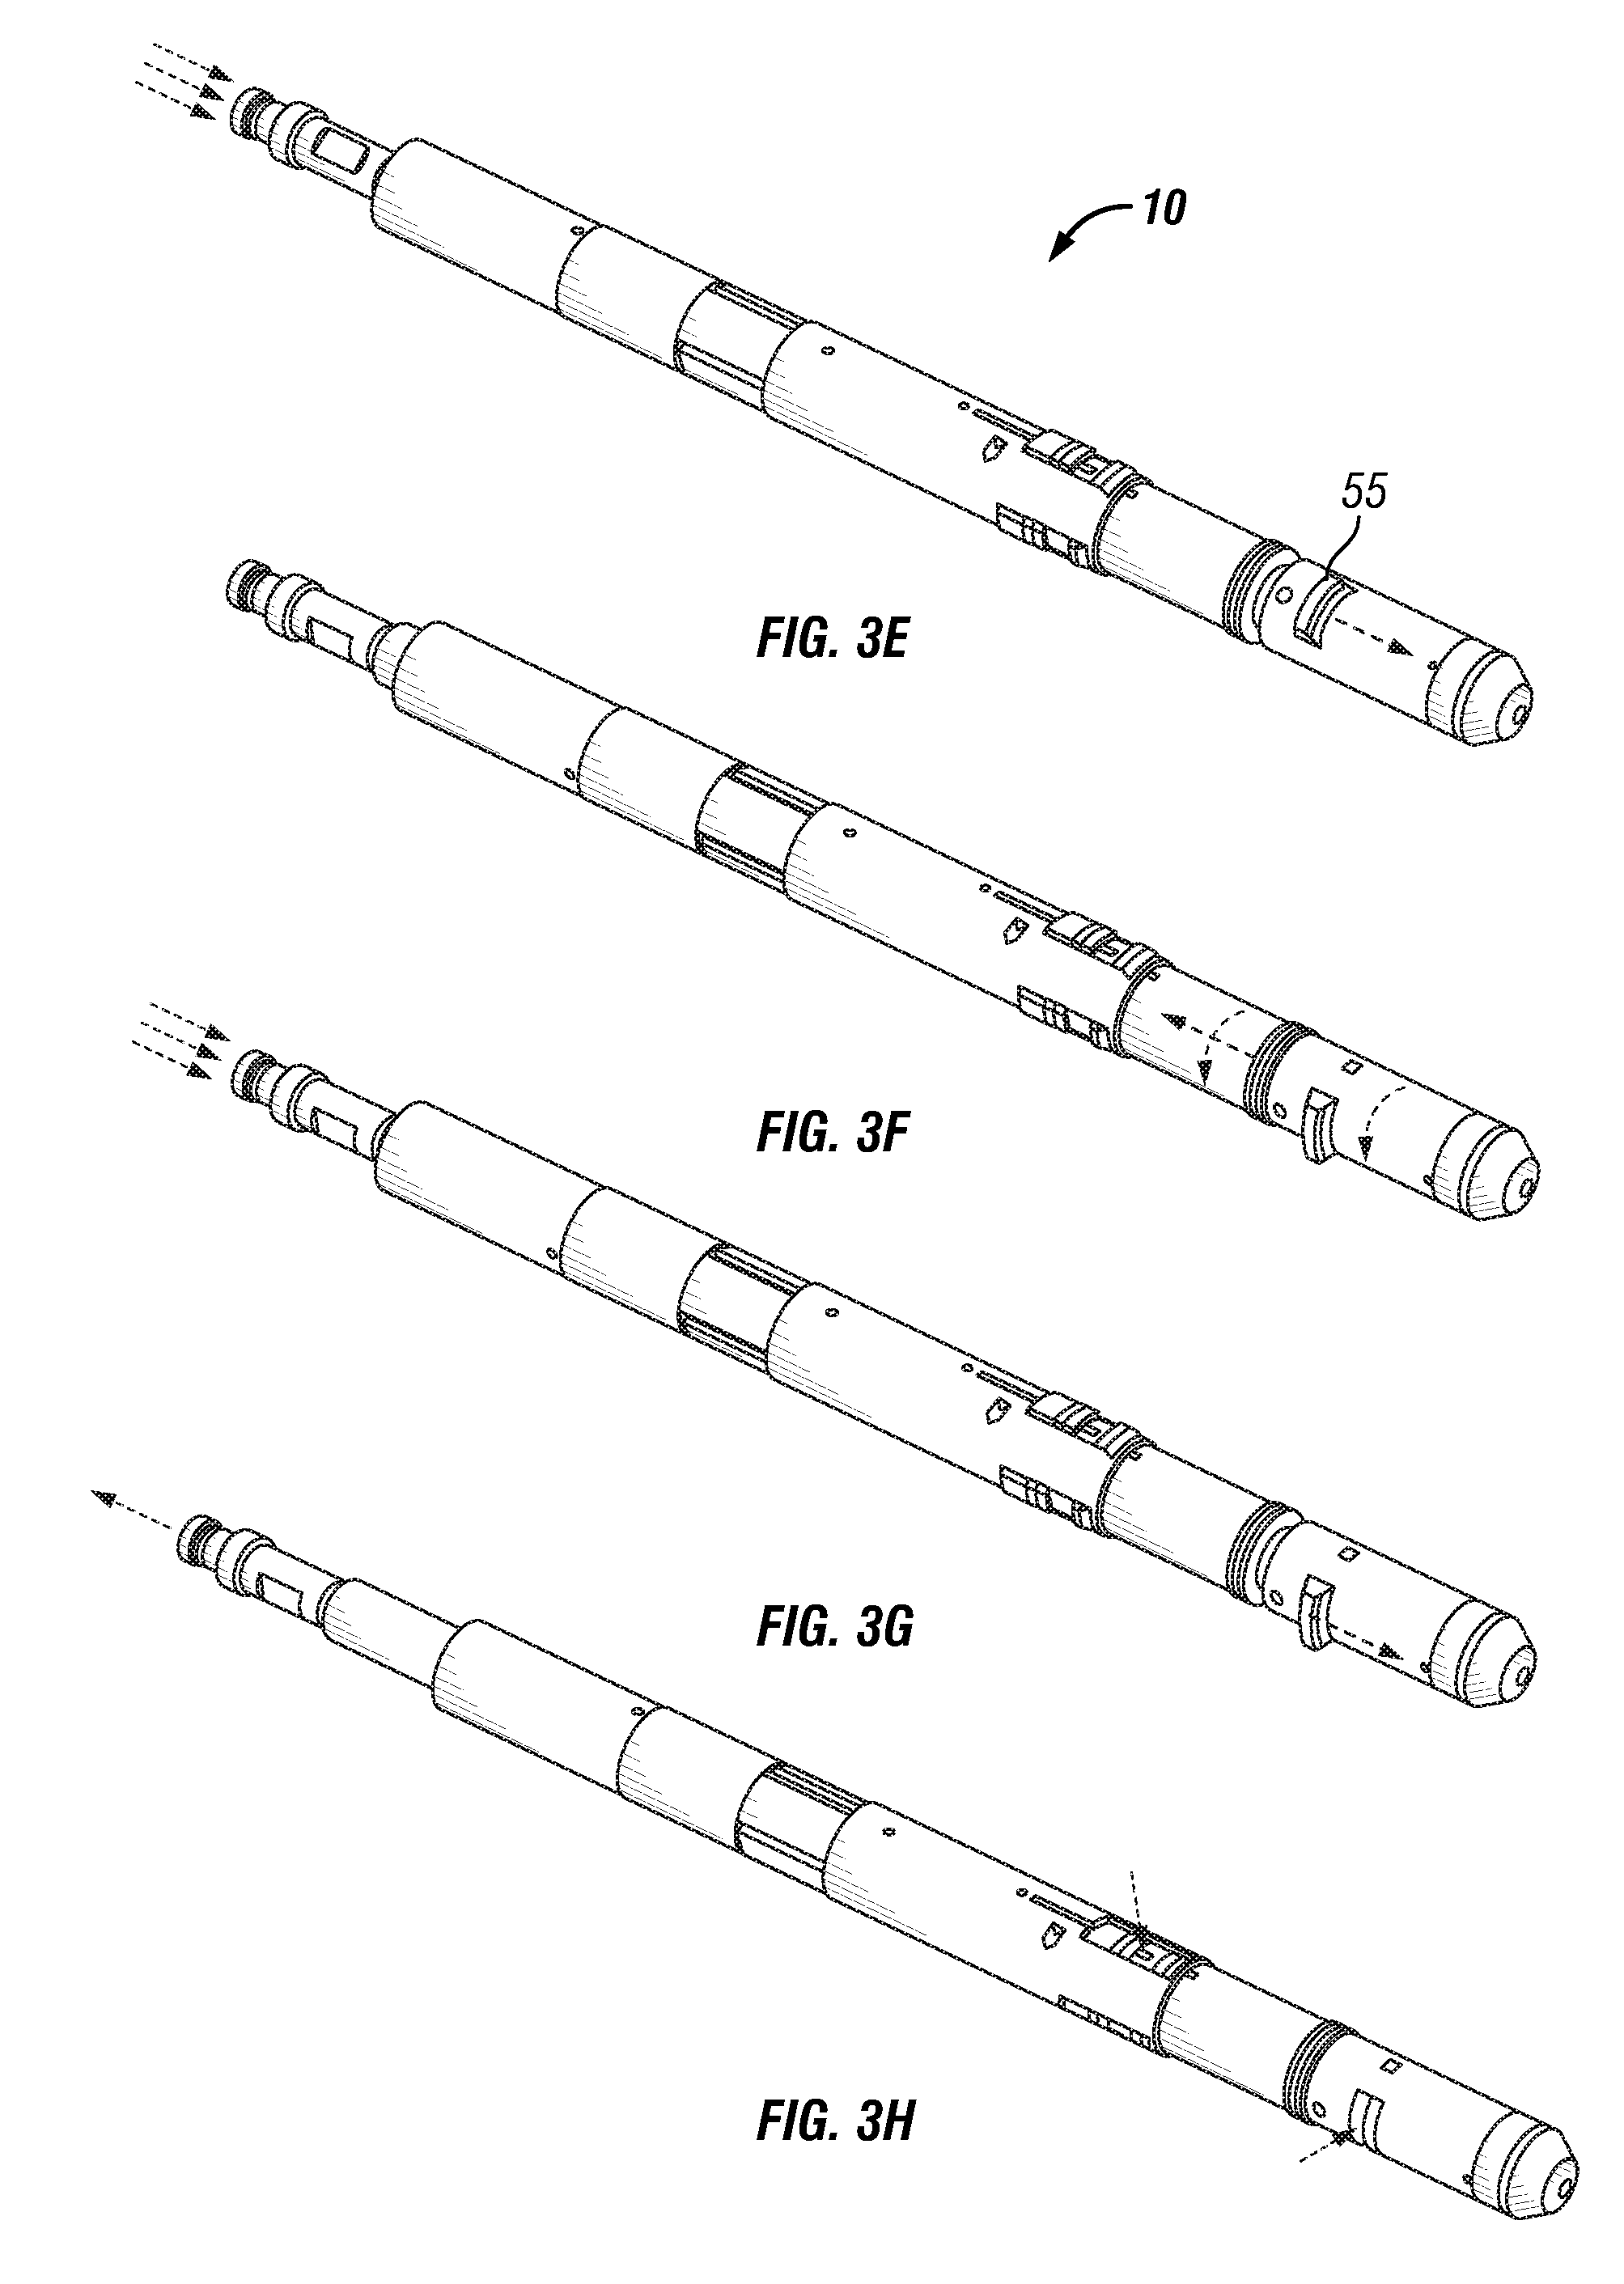 Communication tool and method for a subsurface safety valve with communication component